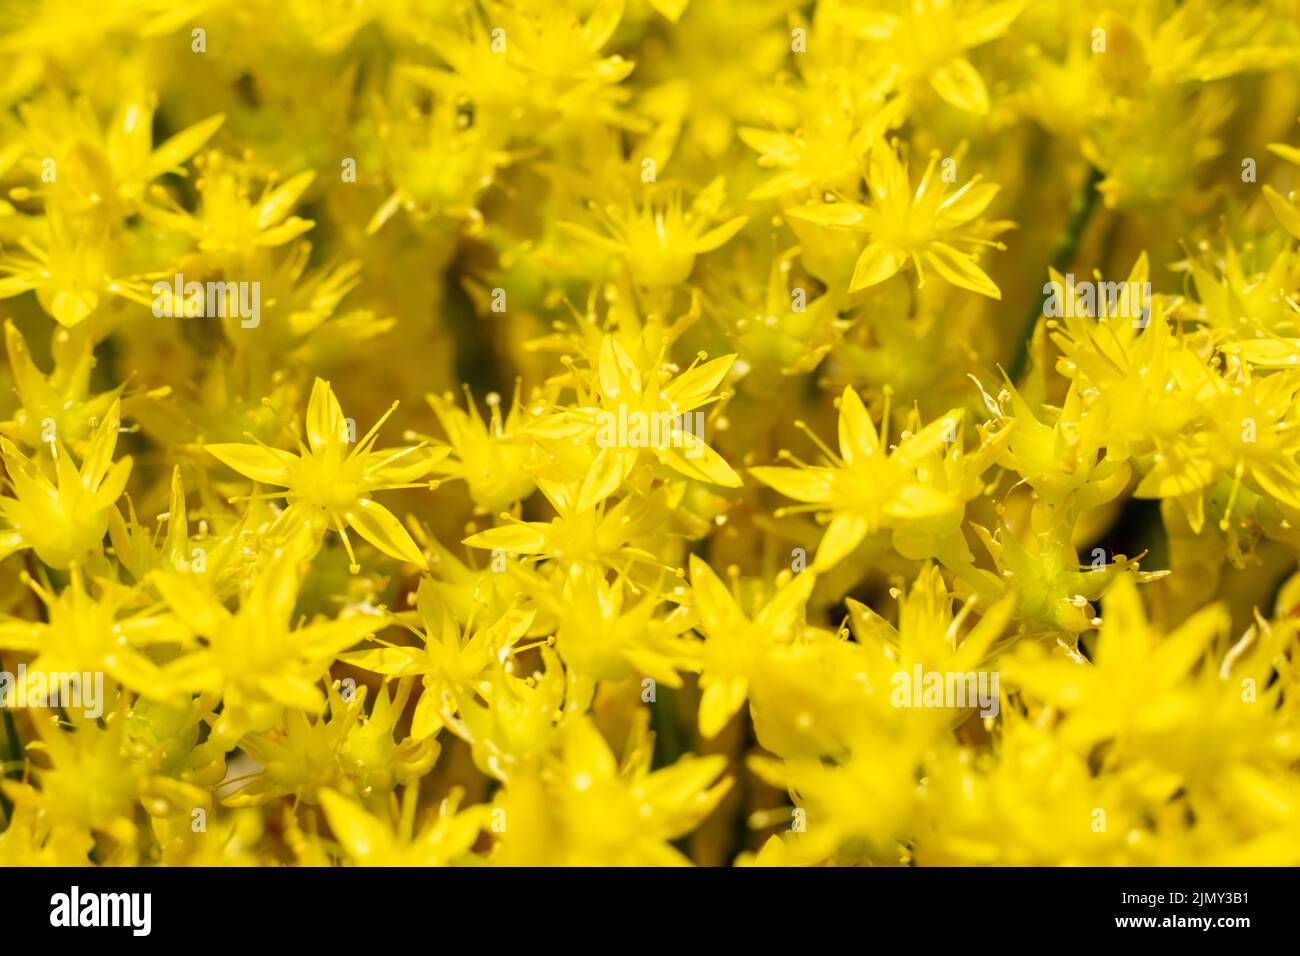 Curative plant used in homeopathy yellow St. Johns wort flowers, sedum acre, or acrid stonecrop, growing large bush in the field Stock Photo